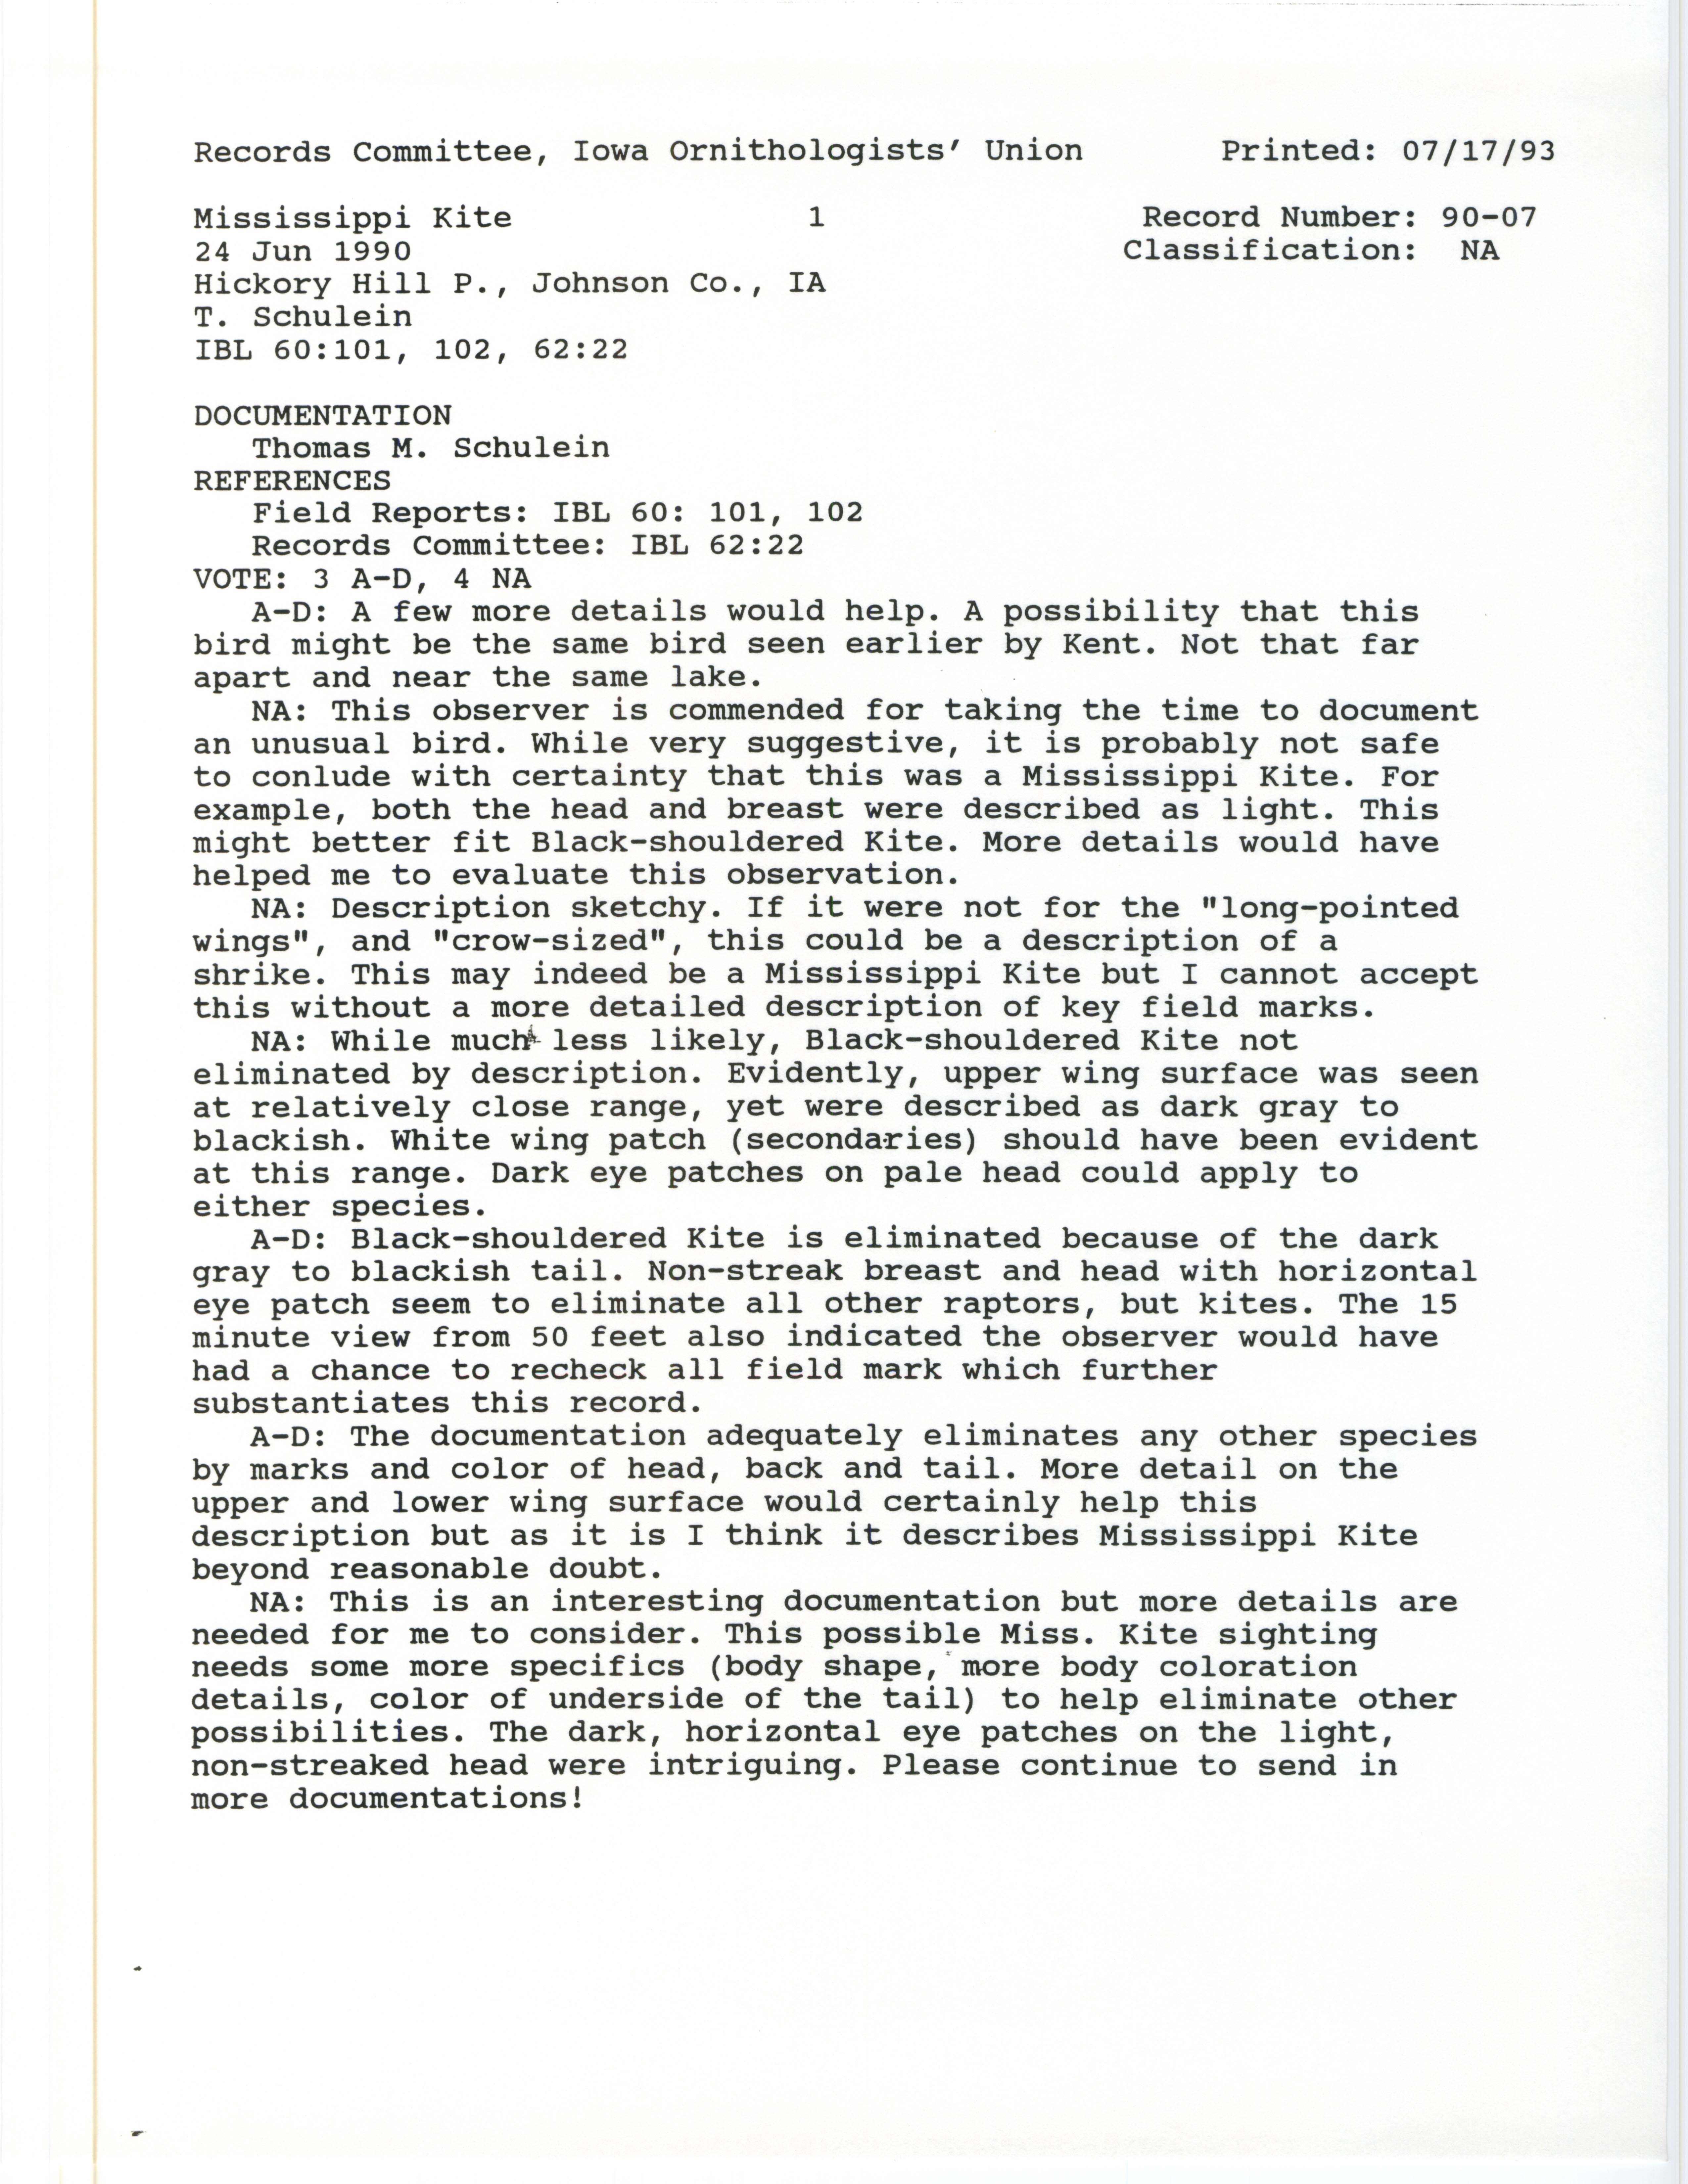 Records Committee review for rare bird sighting of Mississippi Kite at Hickory Hill Park, 1990